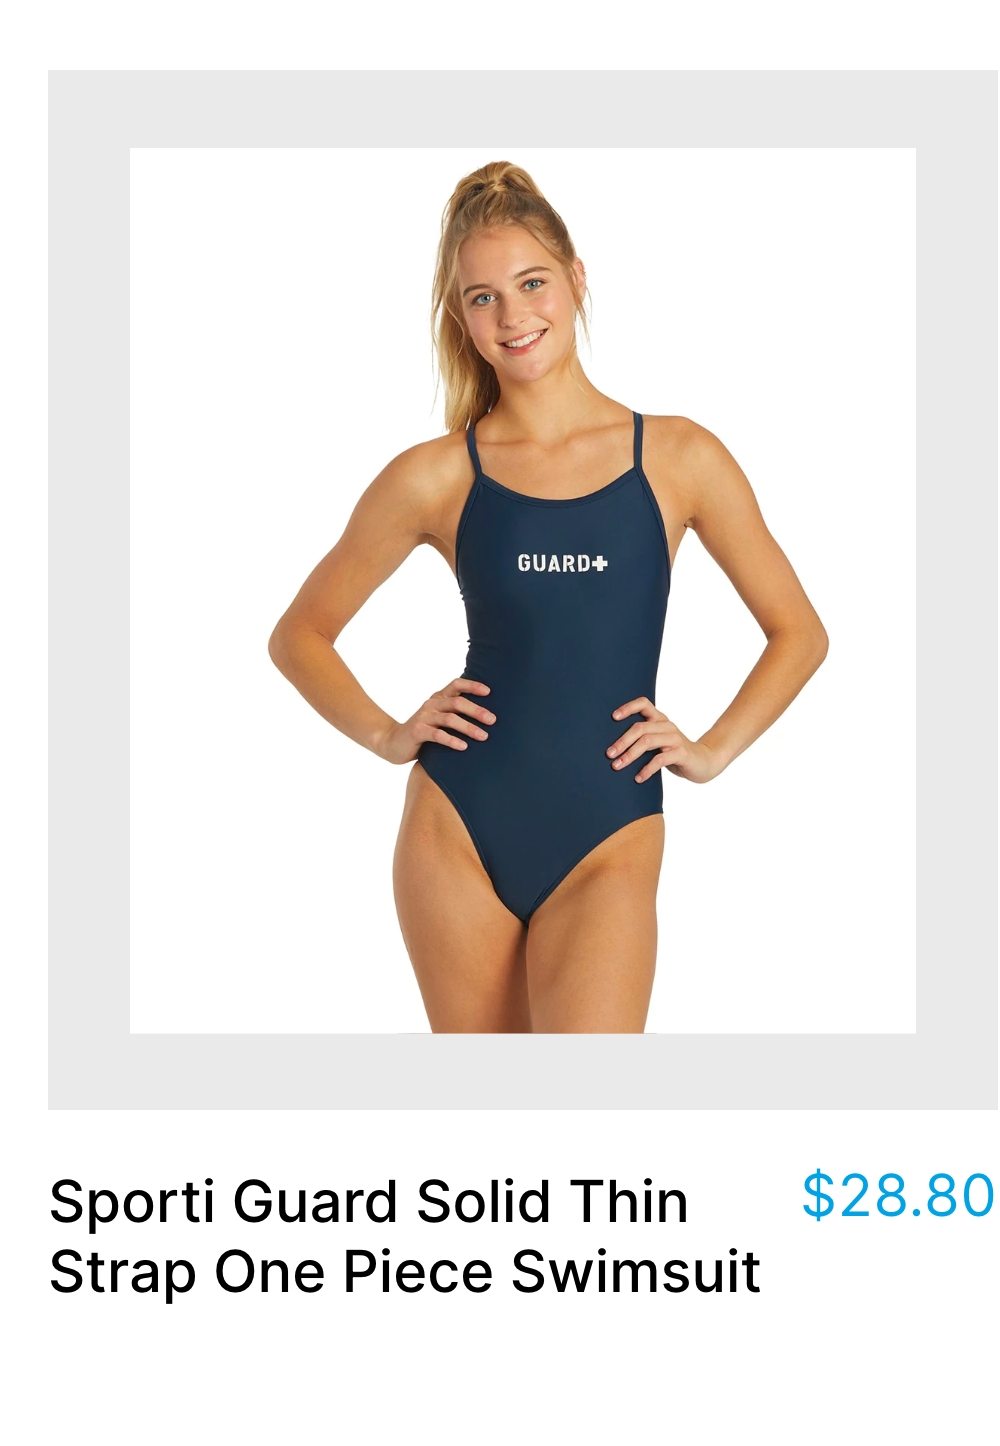 Sporti Guard Solid Thin Strap One Piece Swimsuit